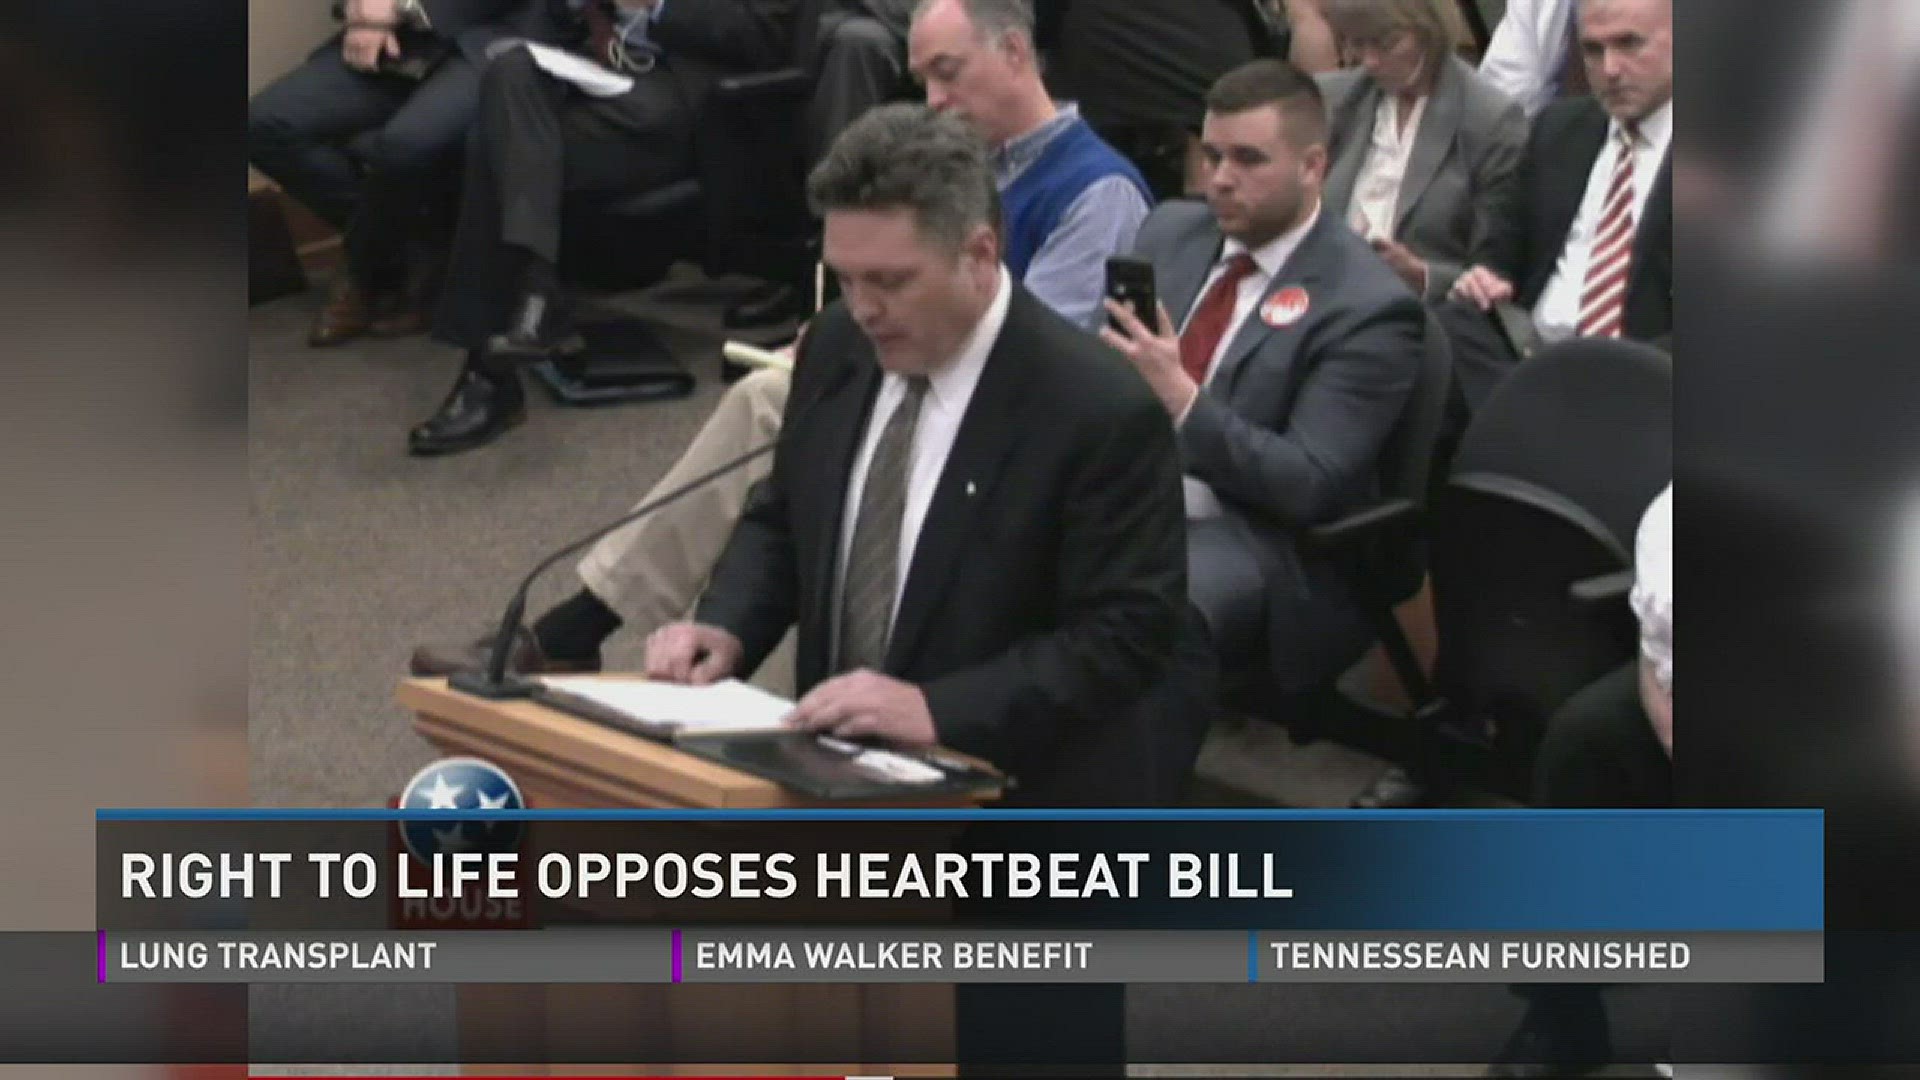 March 1, 2017: Some unexpected resistance in the Tennessee House disrupted progress on the so-called Heartbeat Bill.